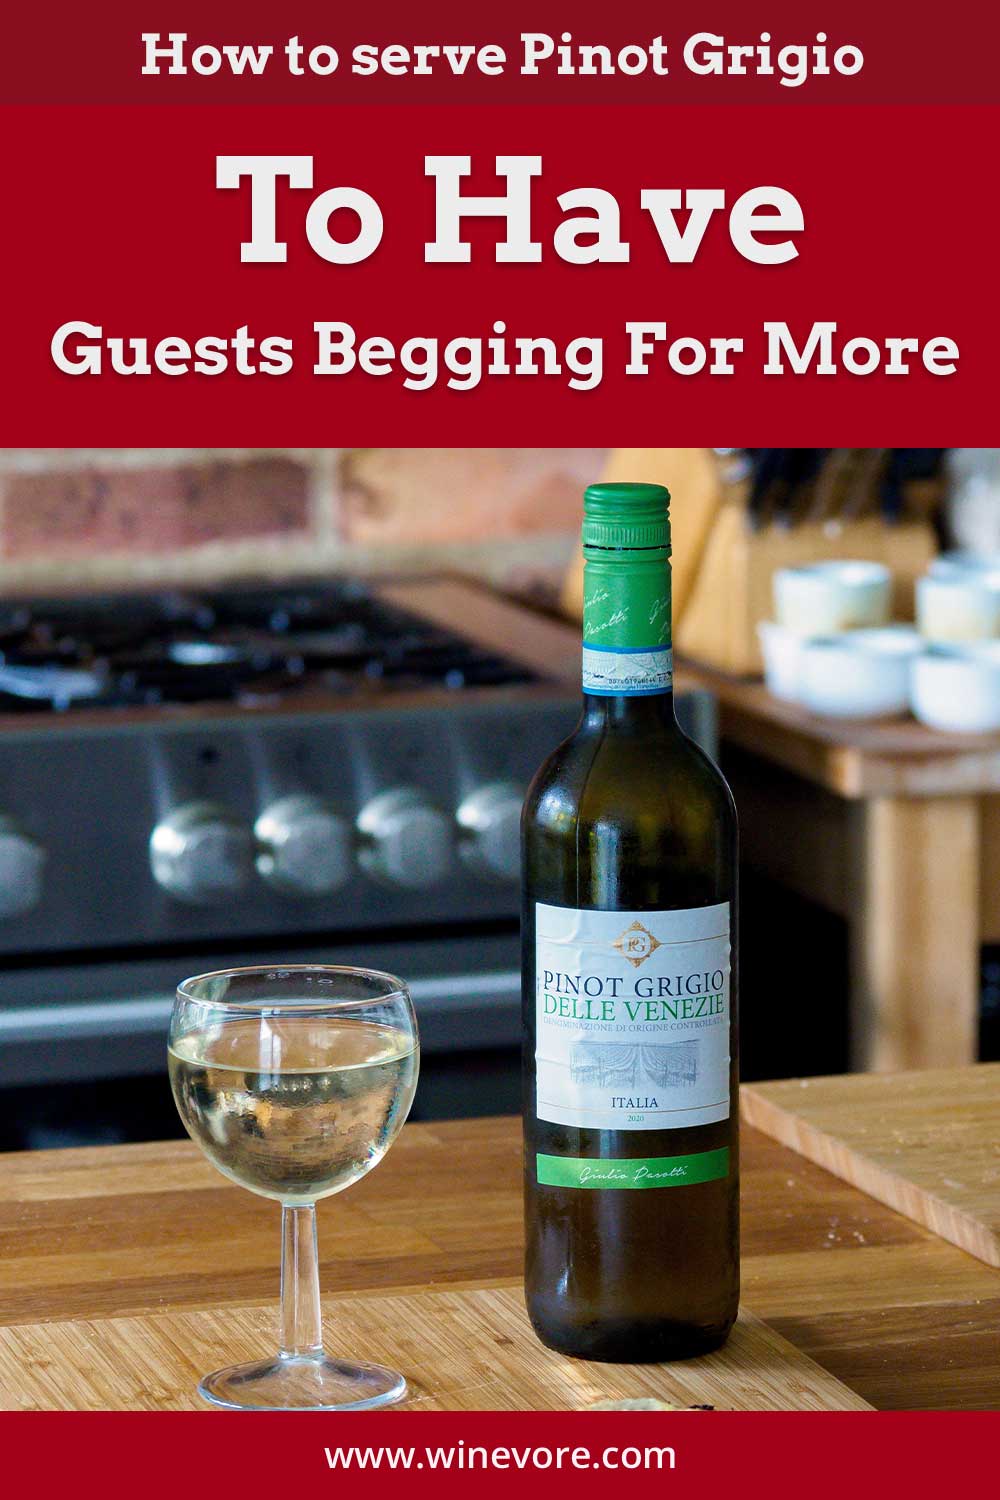 A glass of wine with a bottle on a wooden surface in front of a stove - How to serve Pinot Grigio.